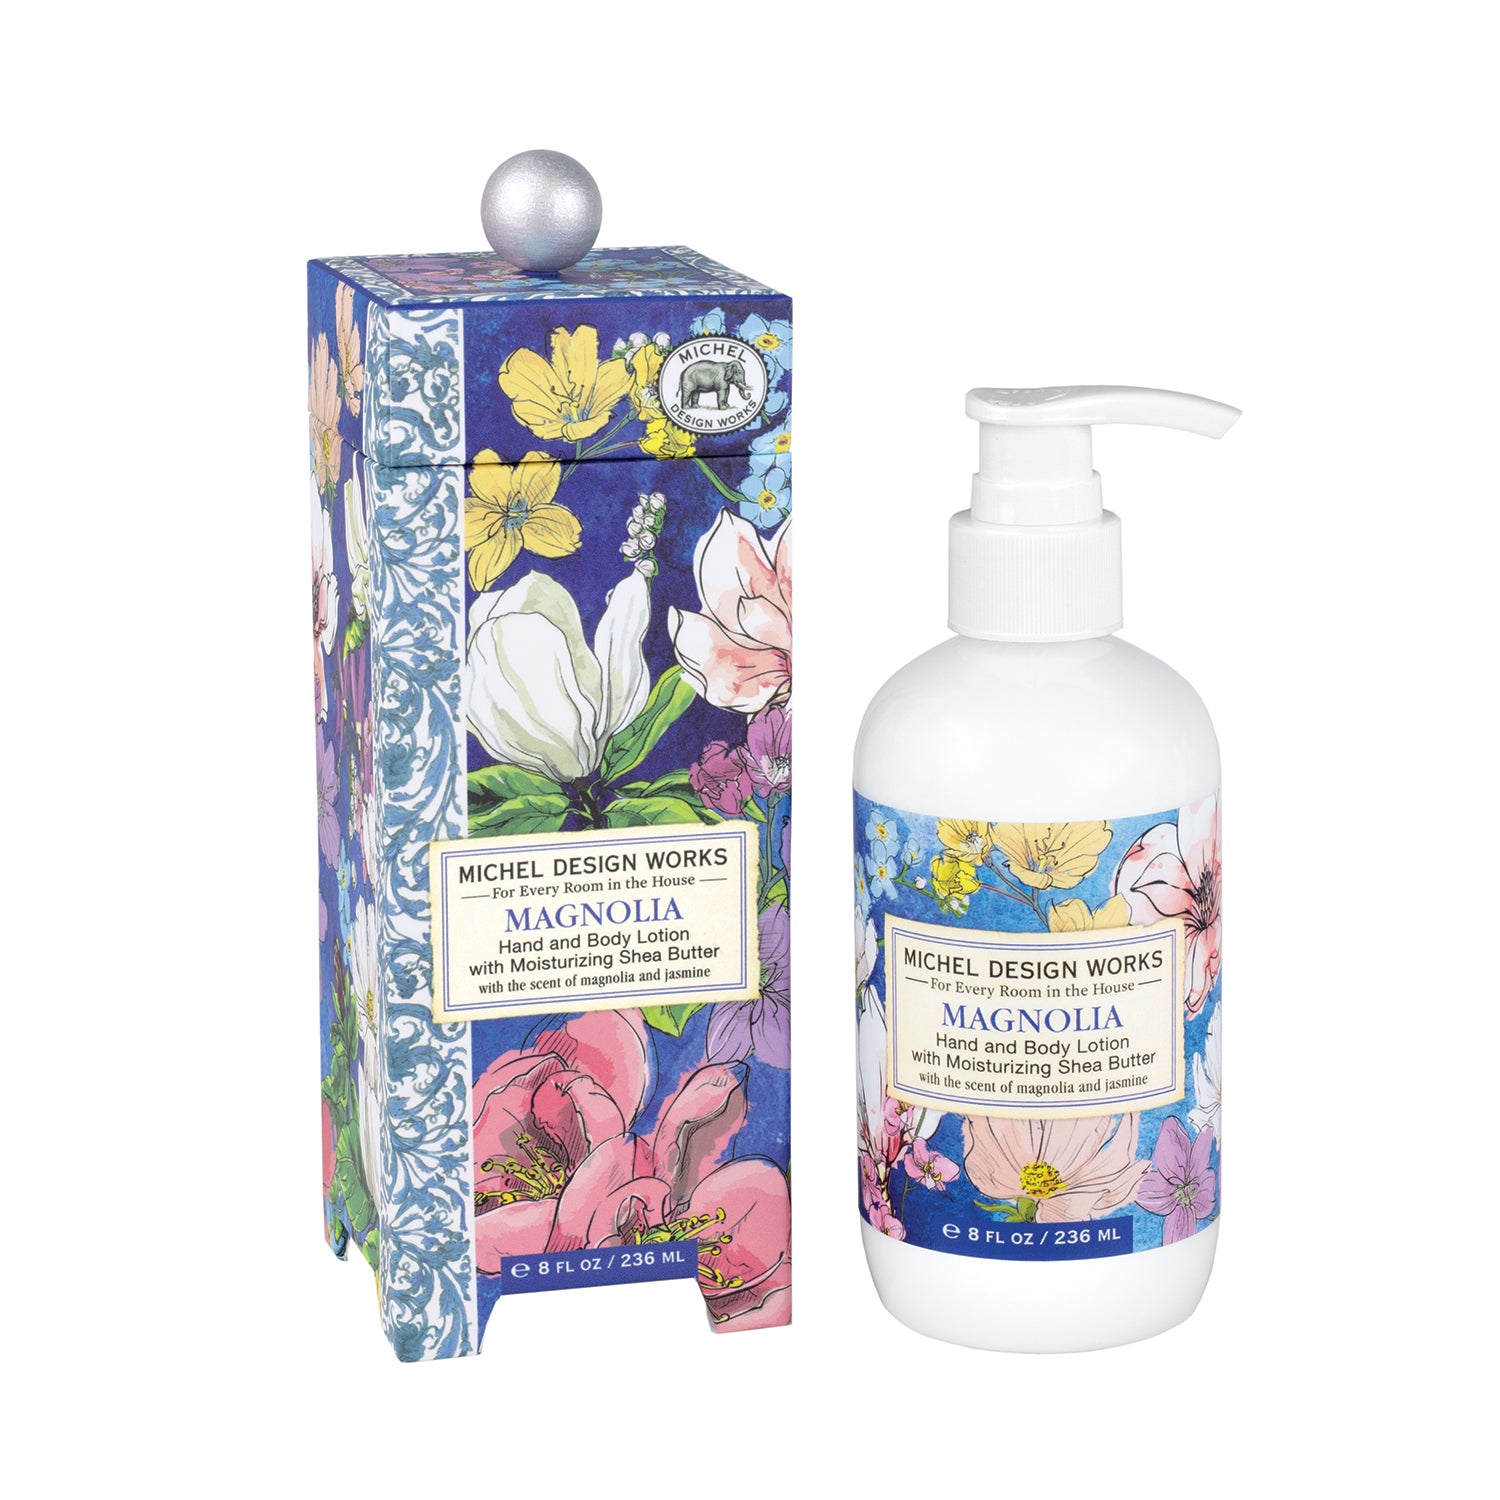 Michel Design Works - Magnolia   (Hand and Body Lotion)